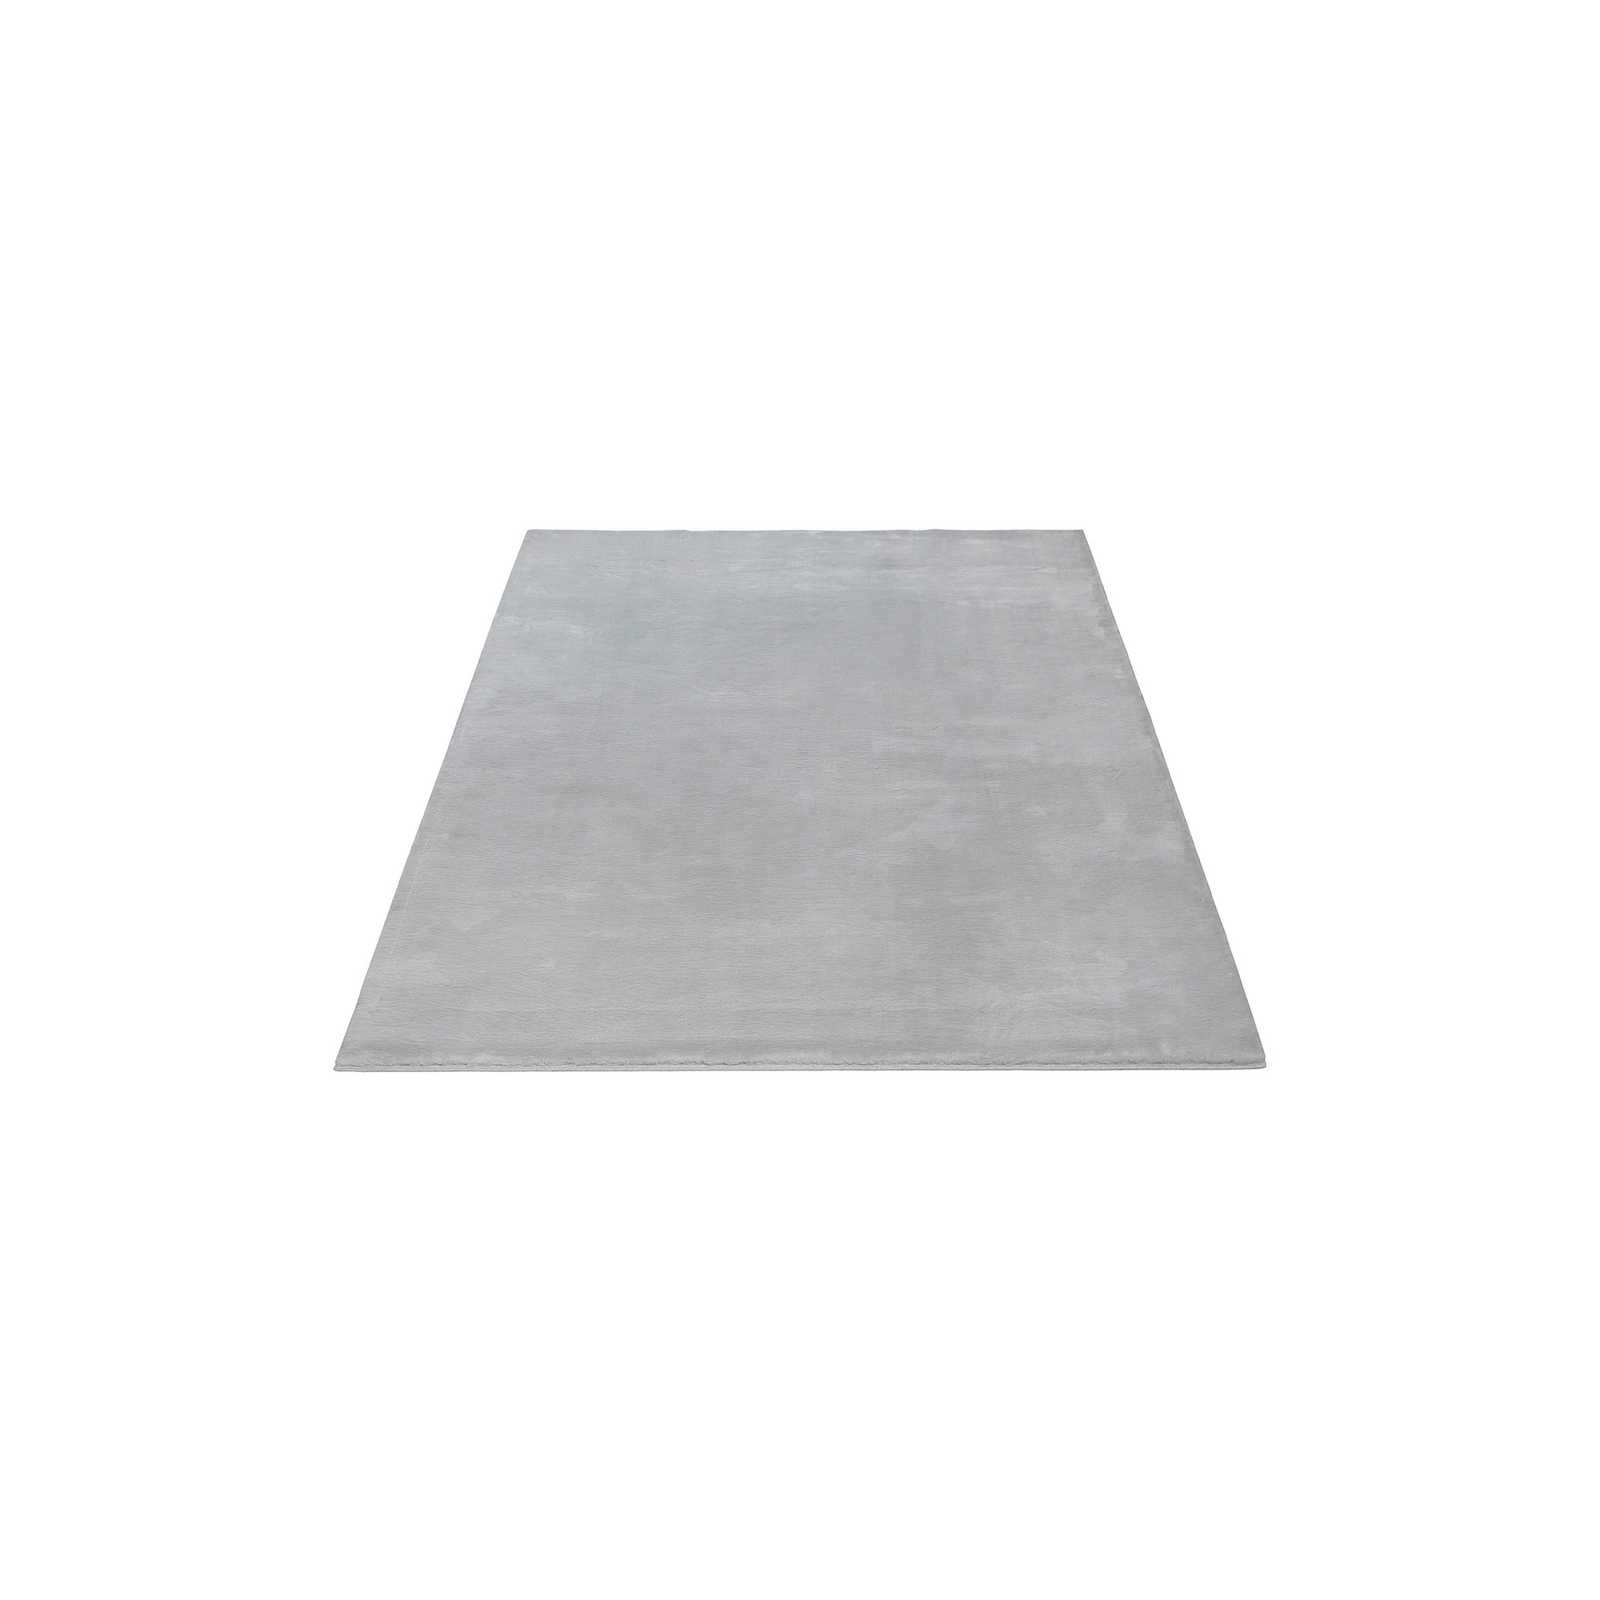 Cosy high pile carpet in soft grey - 170 x 120 cm
